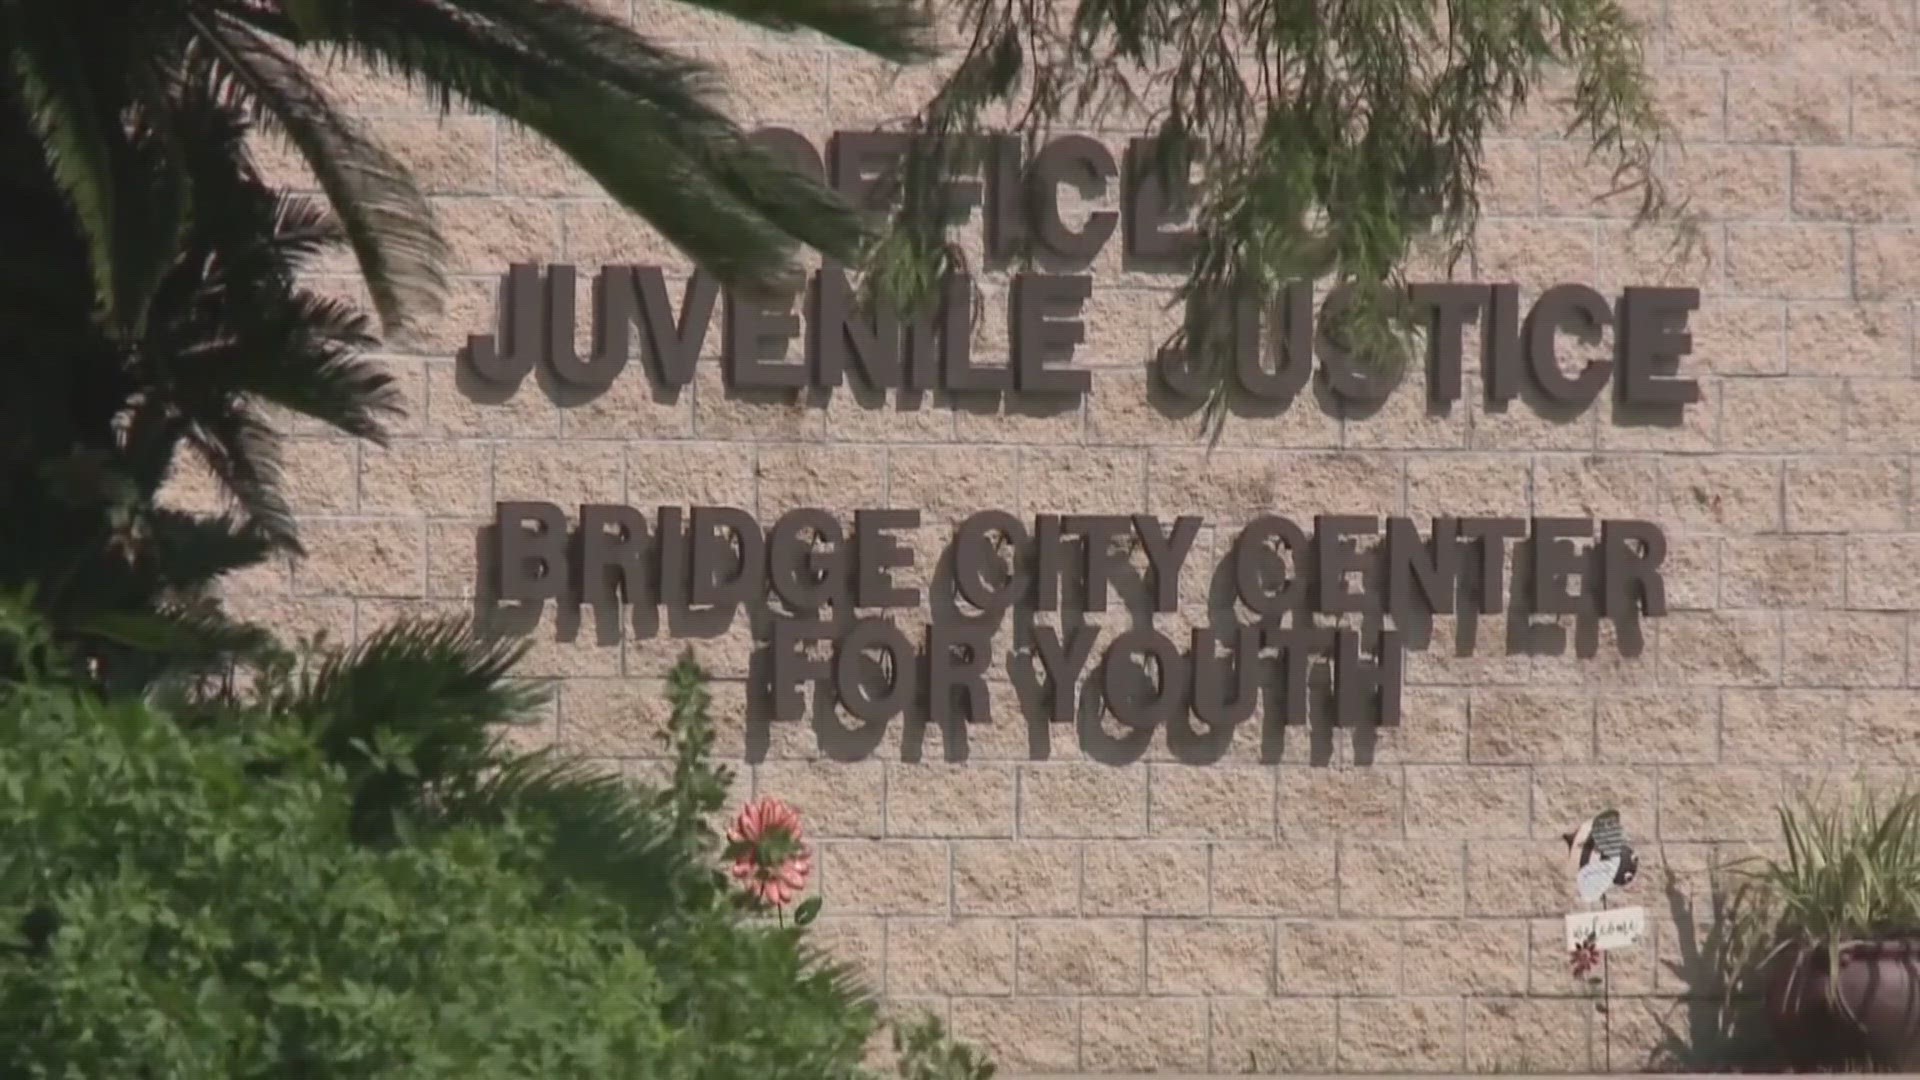 The Louisiana legislature is set to hold a special session on crime in a few weeks, where they’ll discuss solutions to the juvenile crime problem.